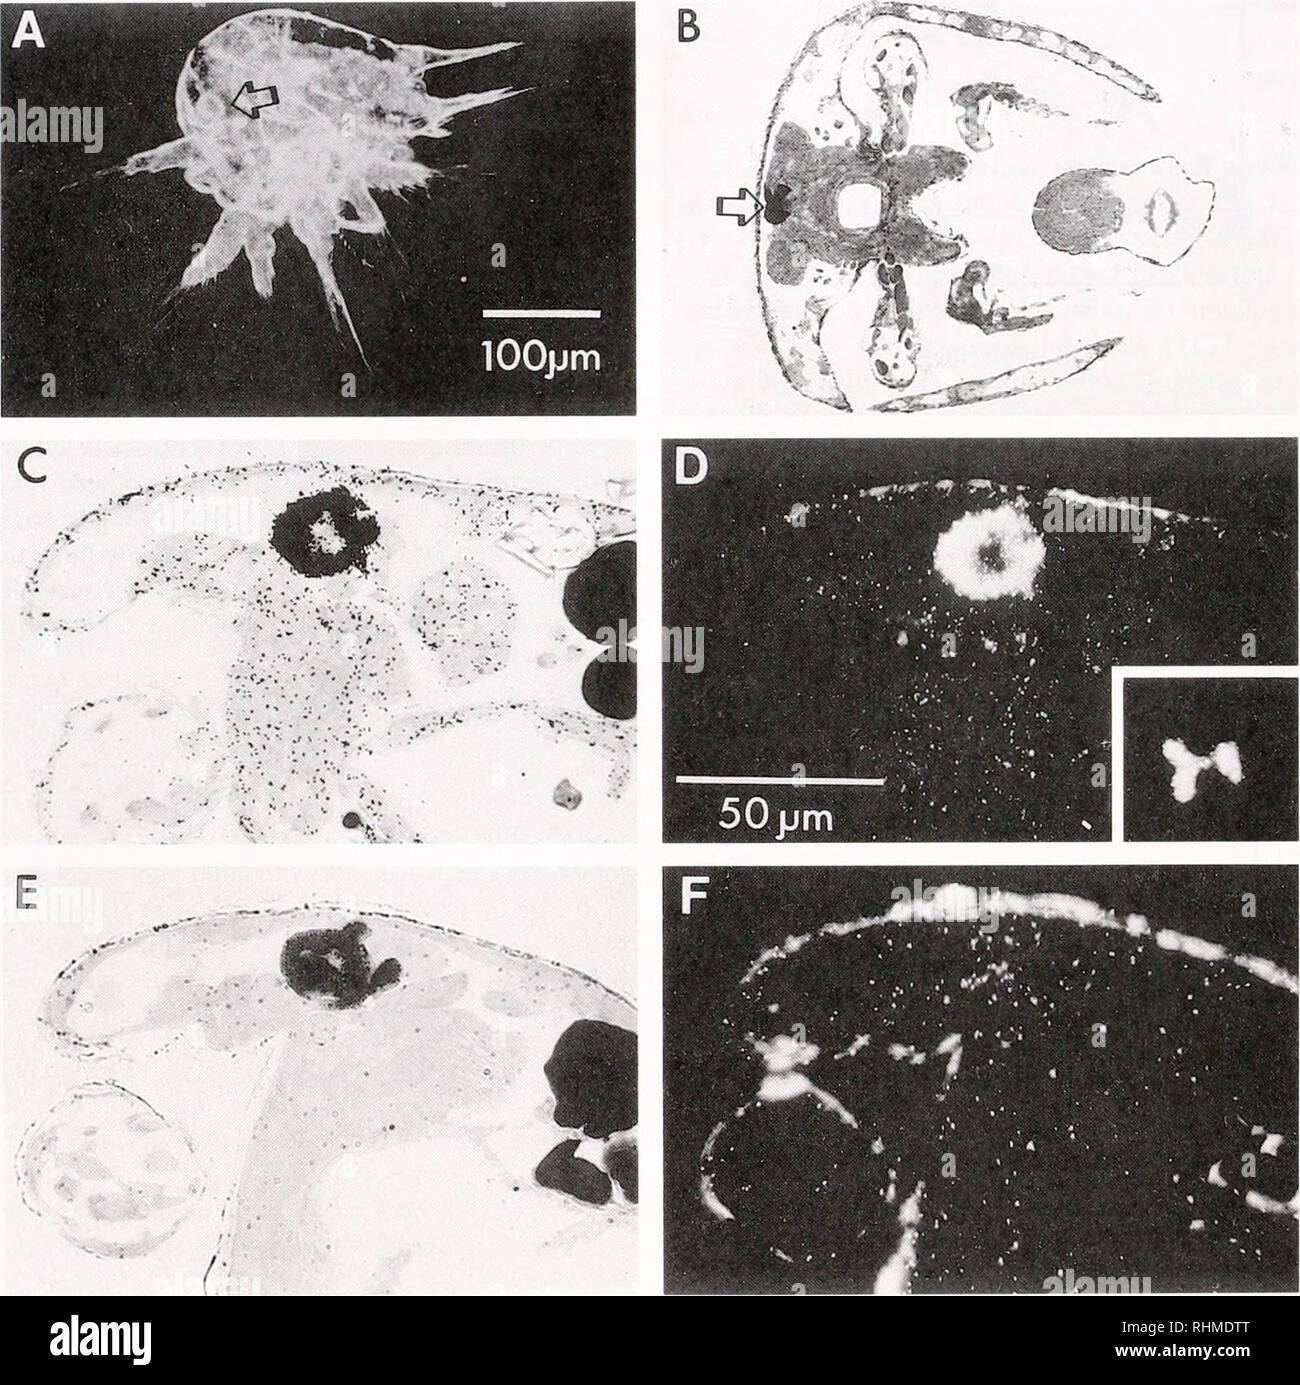 . The Biological bulletin. Biology; Zoology; Biology; Marine Biology. 56 A. E. STUART ET AL. transporter. Nauplii incubated either in 2 mM histamine or in 20 juA/ chlorpromazine (which would presumably have increased extracellular histamine by blocking uptake) stopped swimming towards the light and eventually sank to the bottom of the tube. The current notion of histamine's action in the visual pathway suggests that the presence of histamine in the cleft would lead to more movement, not less (see Discussion); thus these observations cannot easily be explained and may involve histamine's action Stock Photo